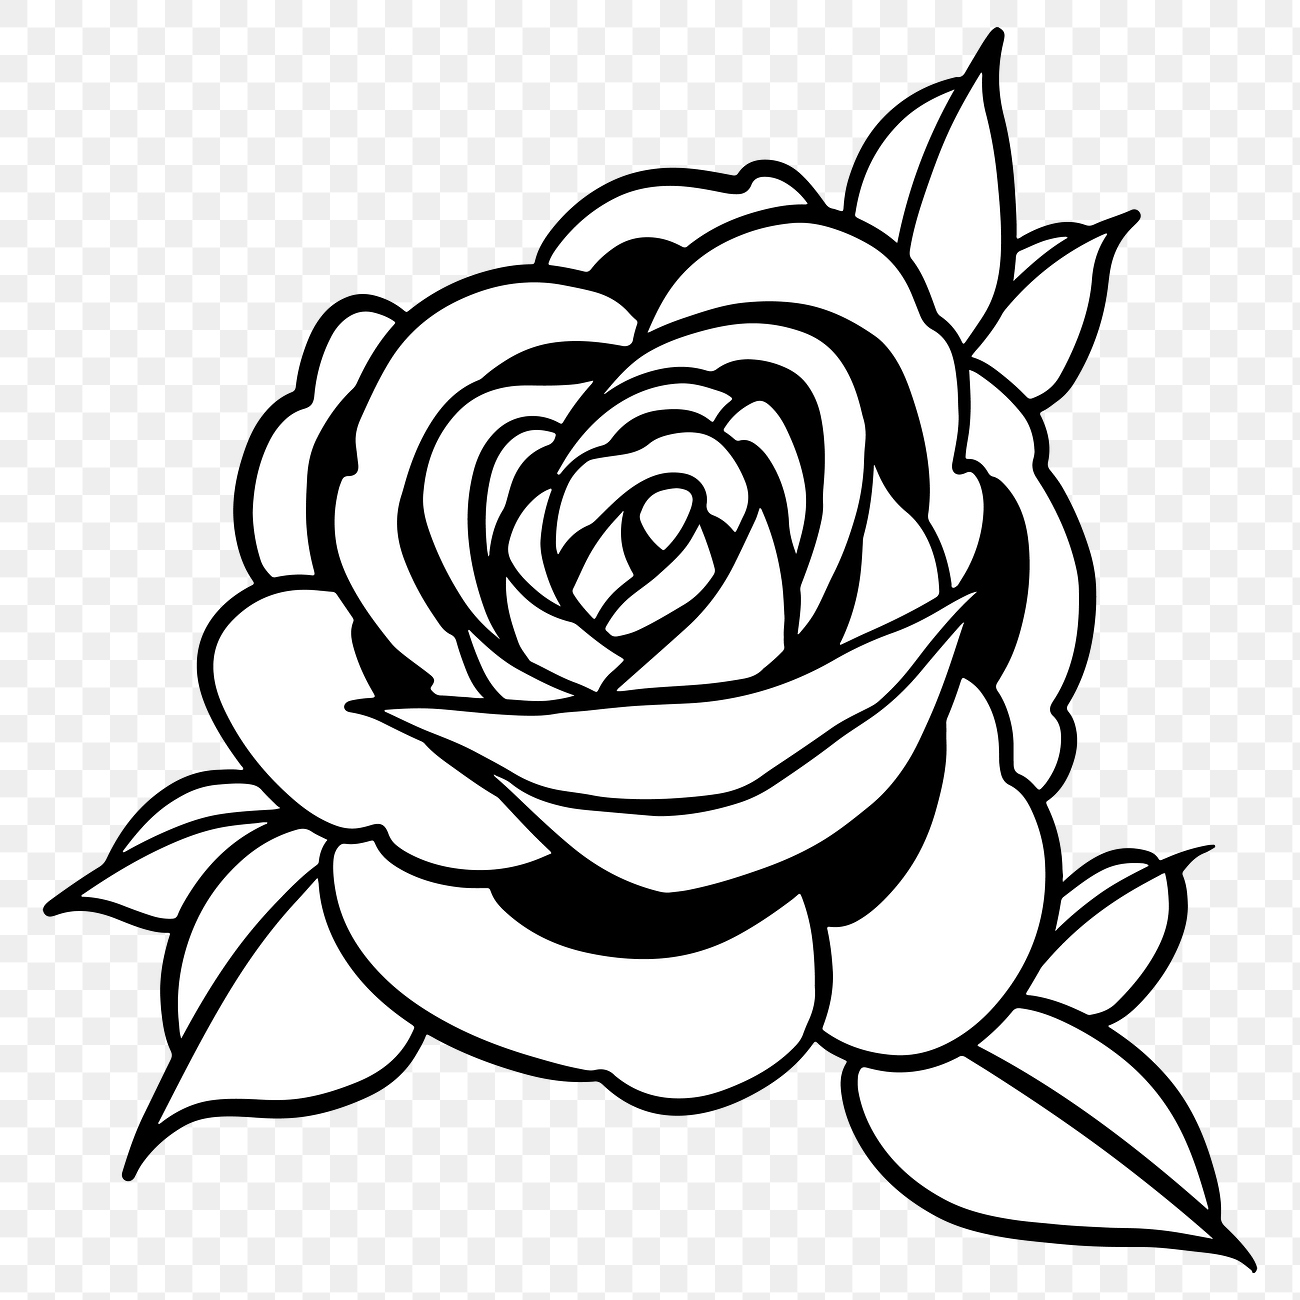 Rose flower outline sticker overlay | Free PNG Sticker - rawpixel